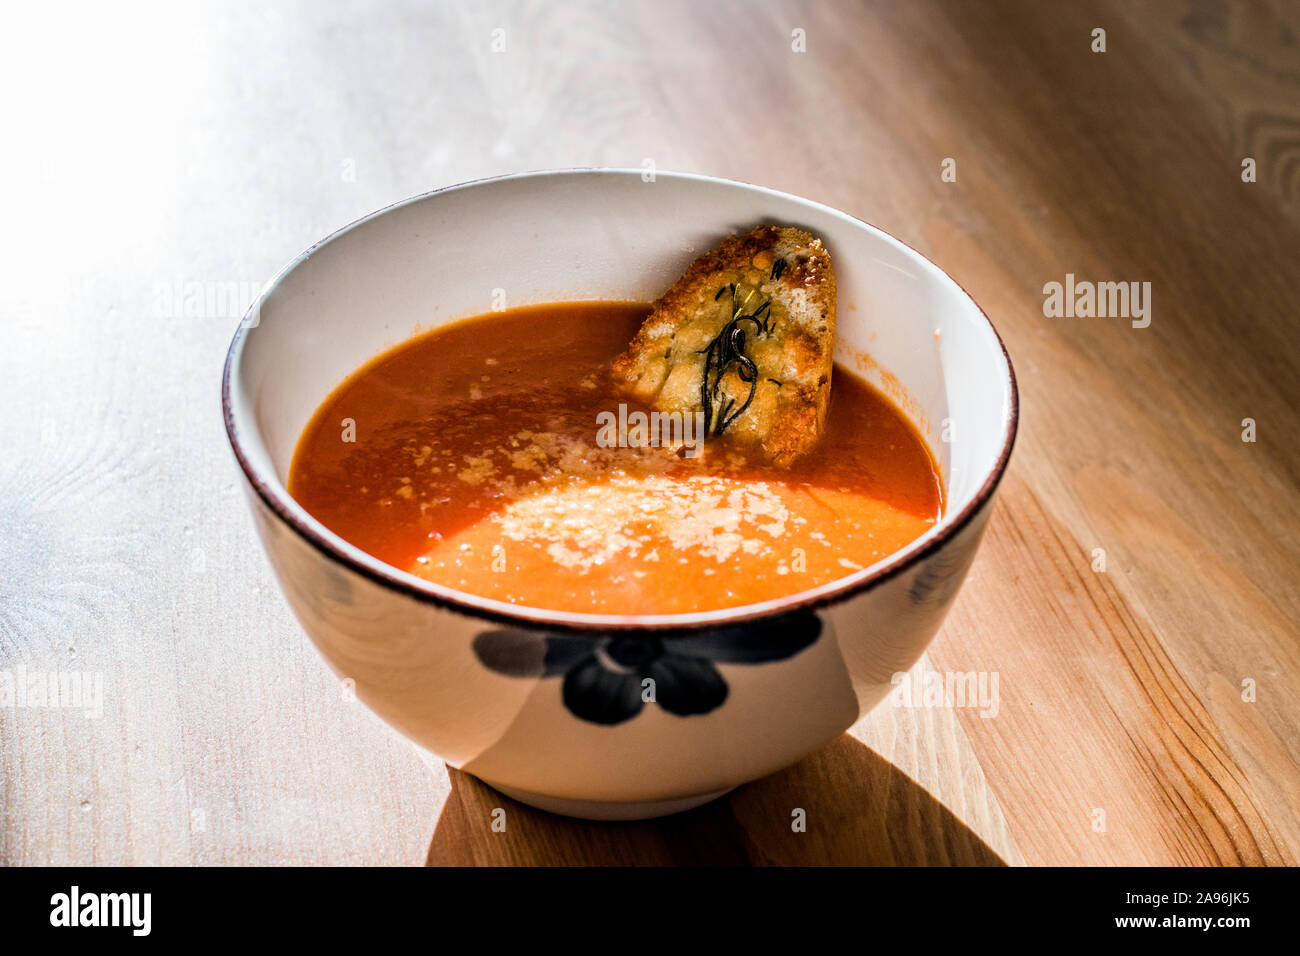 https://c8.alamy.com/comp/2A96JK5/tomato-soup-with-parmesan-cheese-bread-in-natural-light-and-sunlight-homemade-organic-food-2A96JK5.jpg